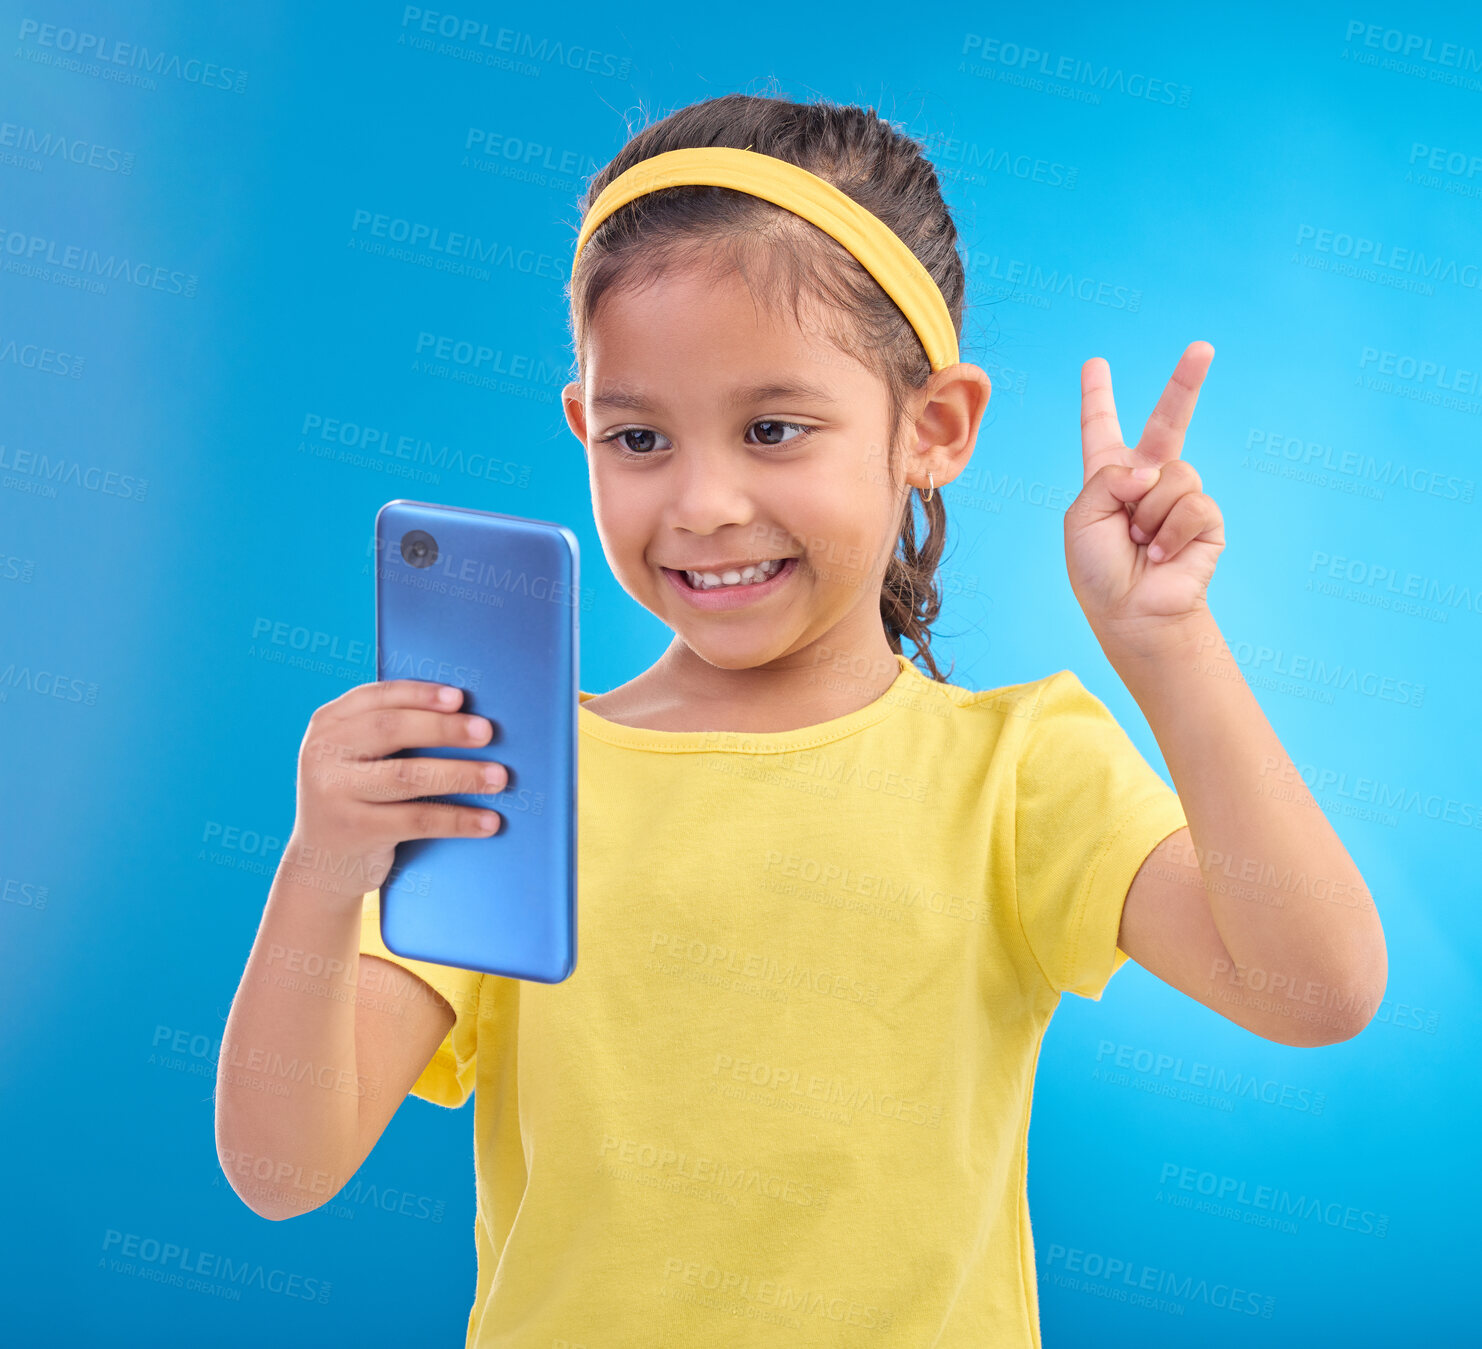 Buy stock photo Phone, girl kid and peace sign selfie in studio isolated on a blue background. Technology, v hand emoji and smile of child with mobile smartphone to take pictures for happy memory or social media.